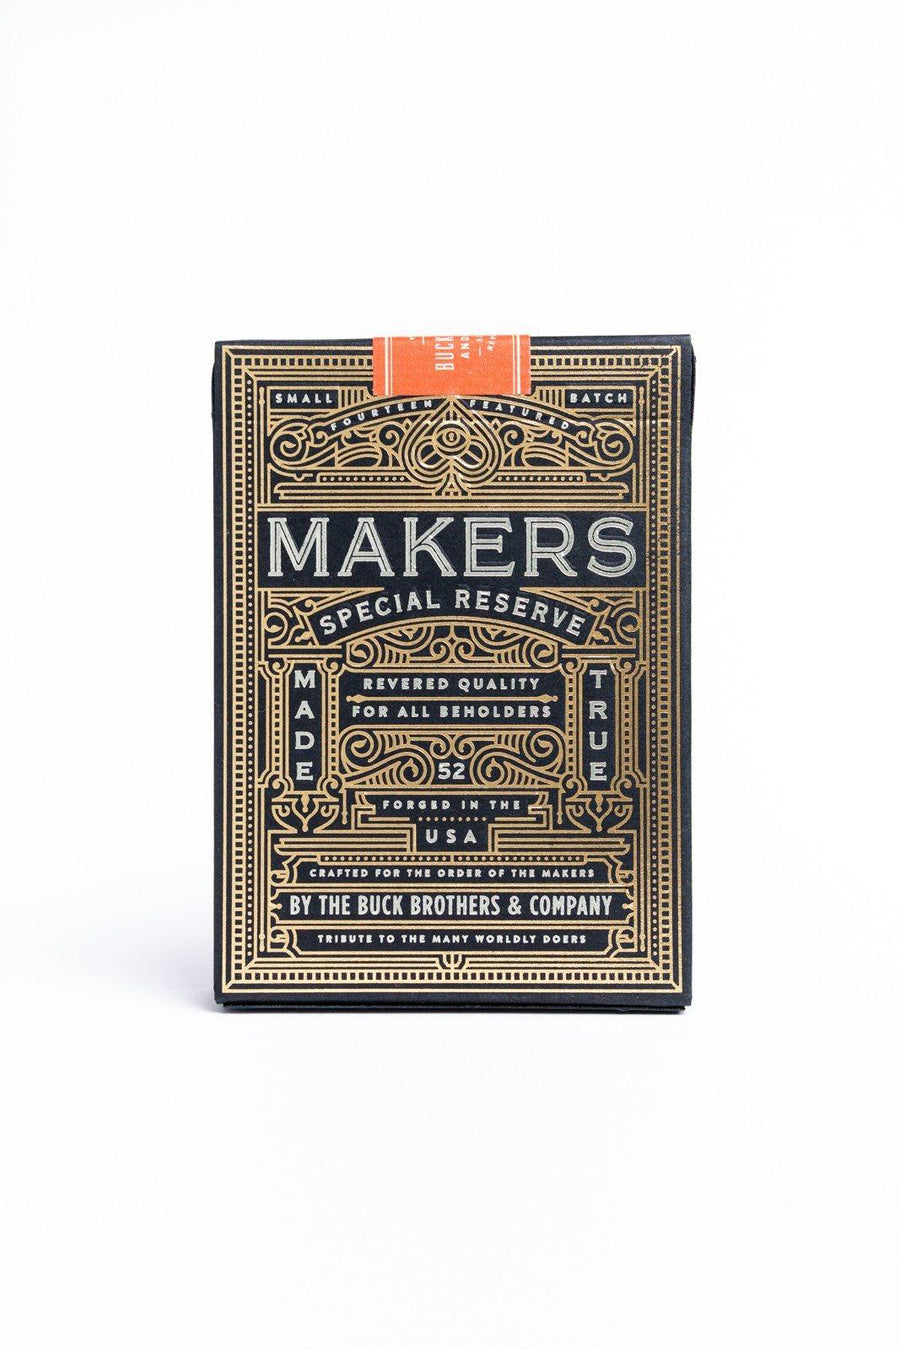 MAKERS: Blacksmith Edition Playing Cards by Dan & Dave